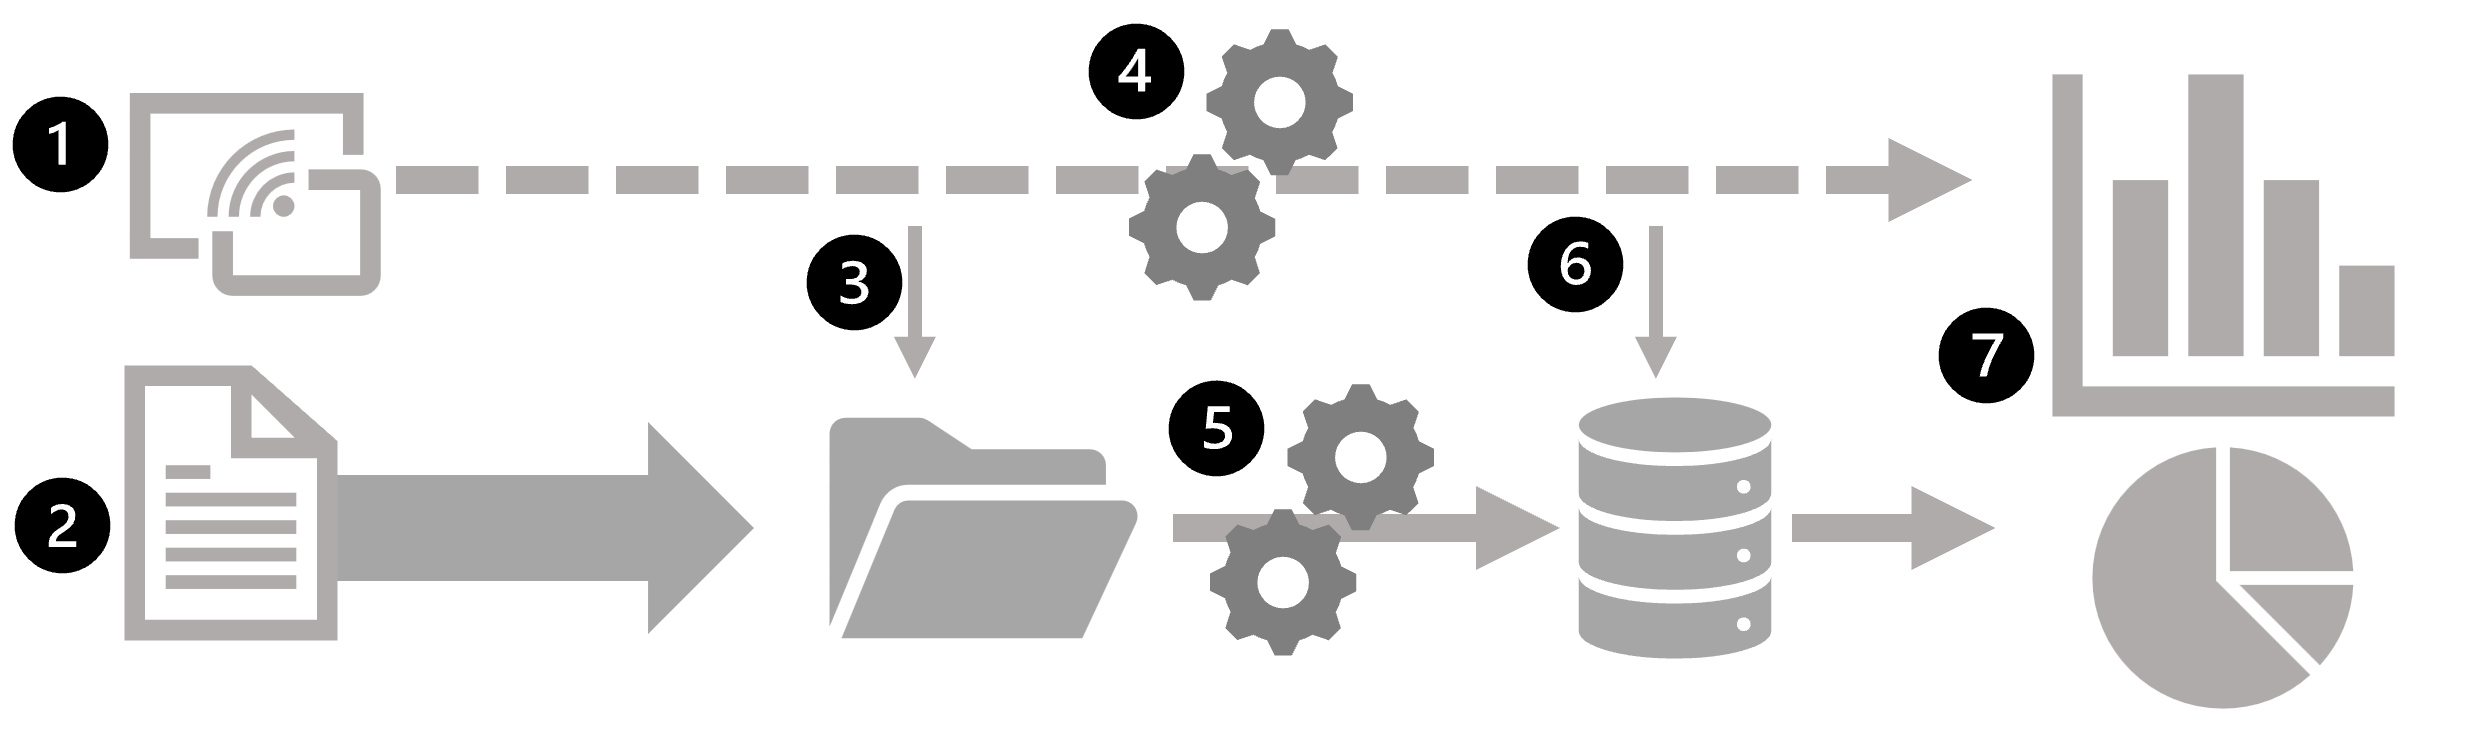 A data analytics architecture that includes batch and stream processing